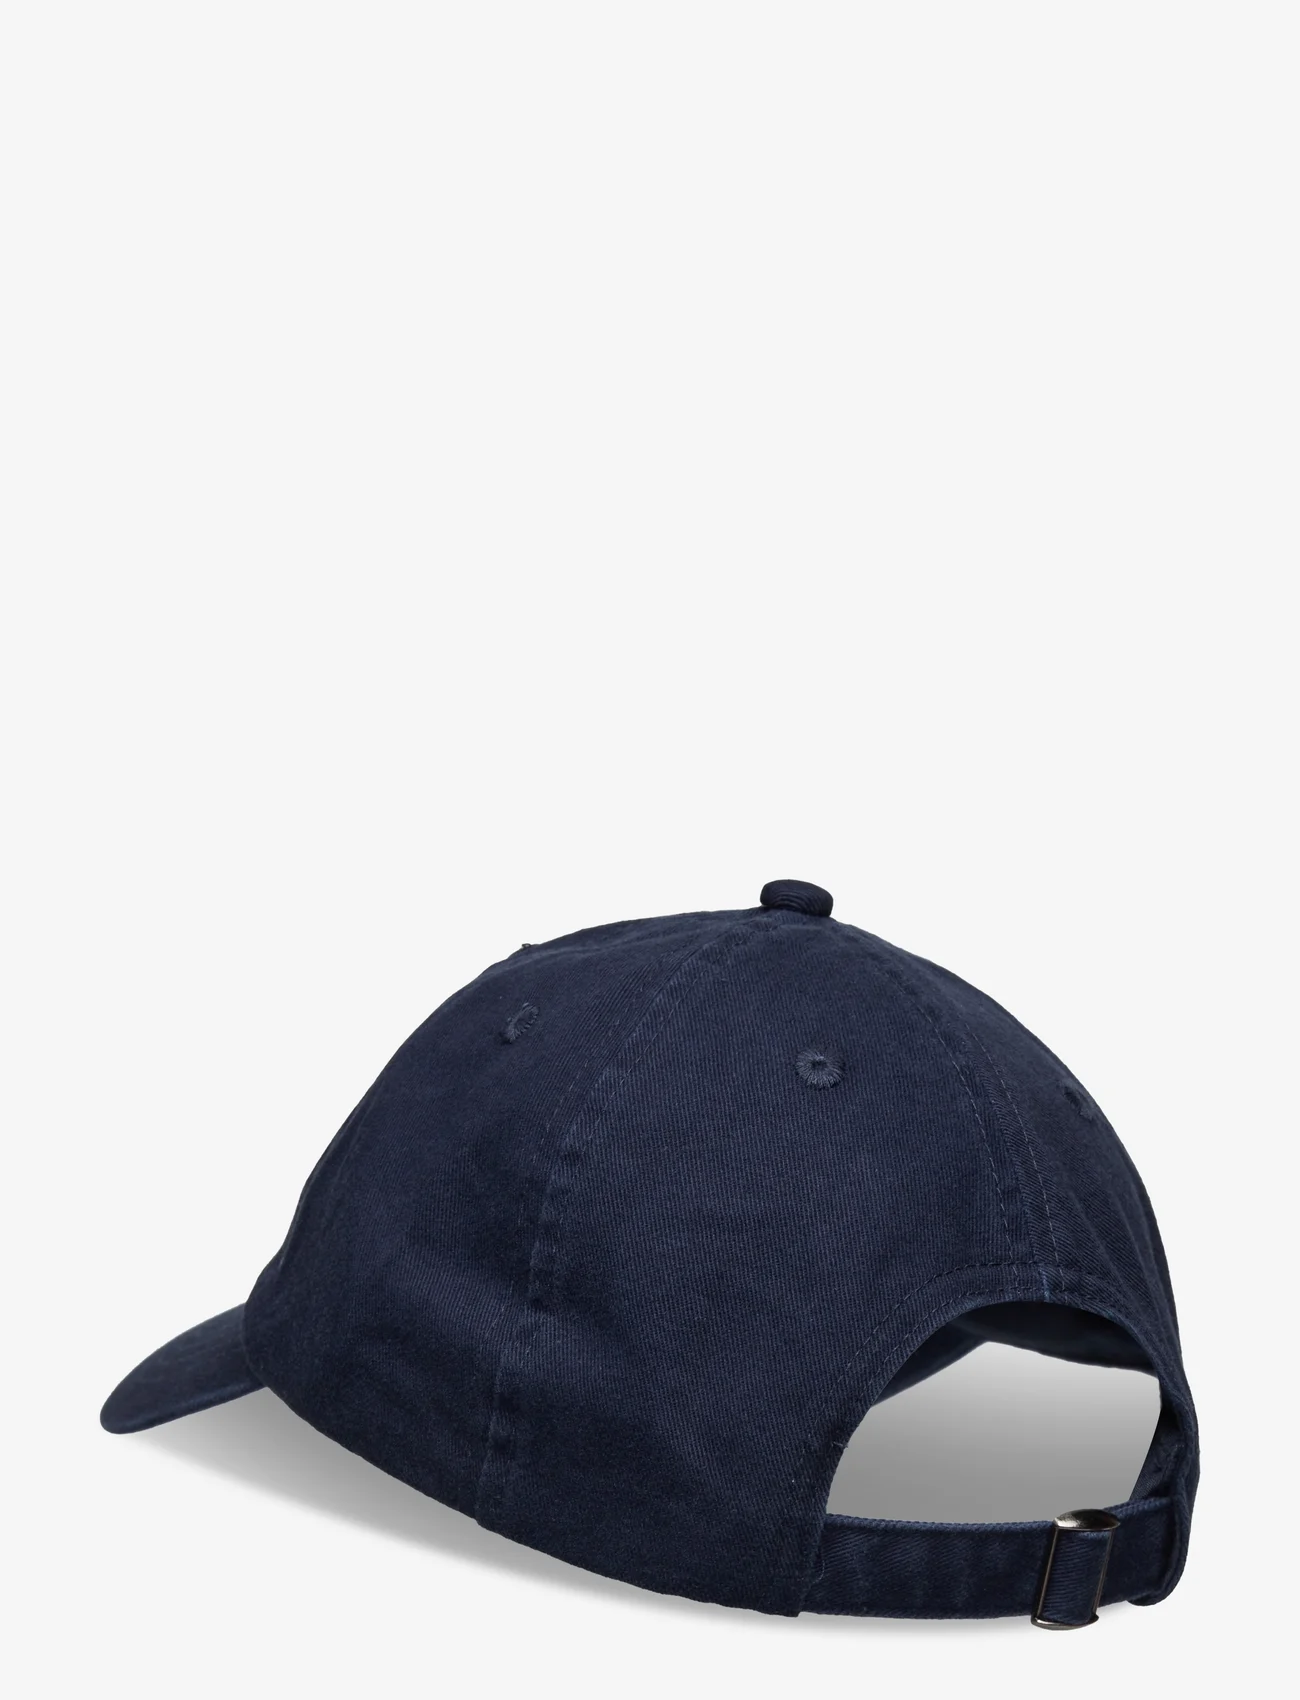 Double A by Wood Wood - Eli embroidery cap - caps - navy - 1